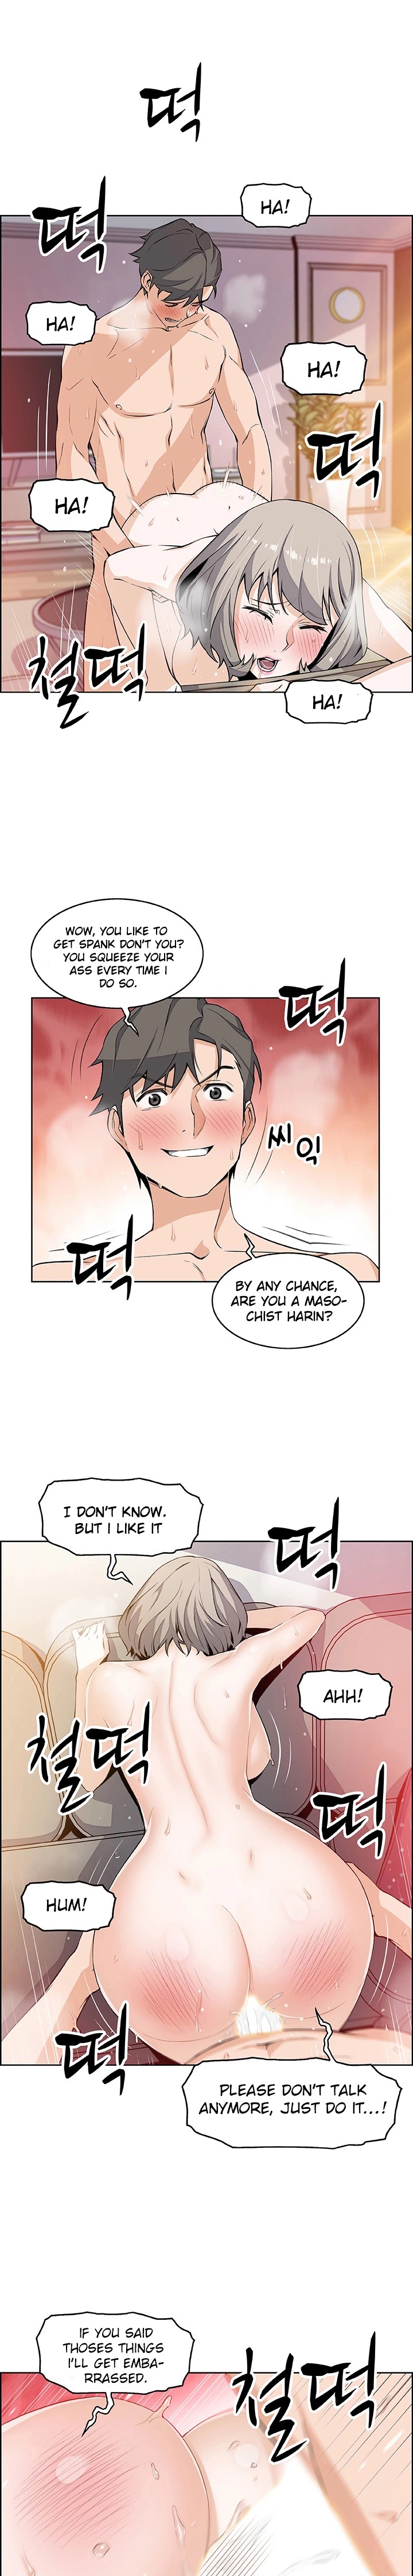 Housekeeper Manhwa - Chapter 20 Page 5